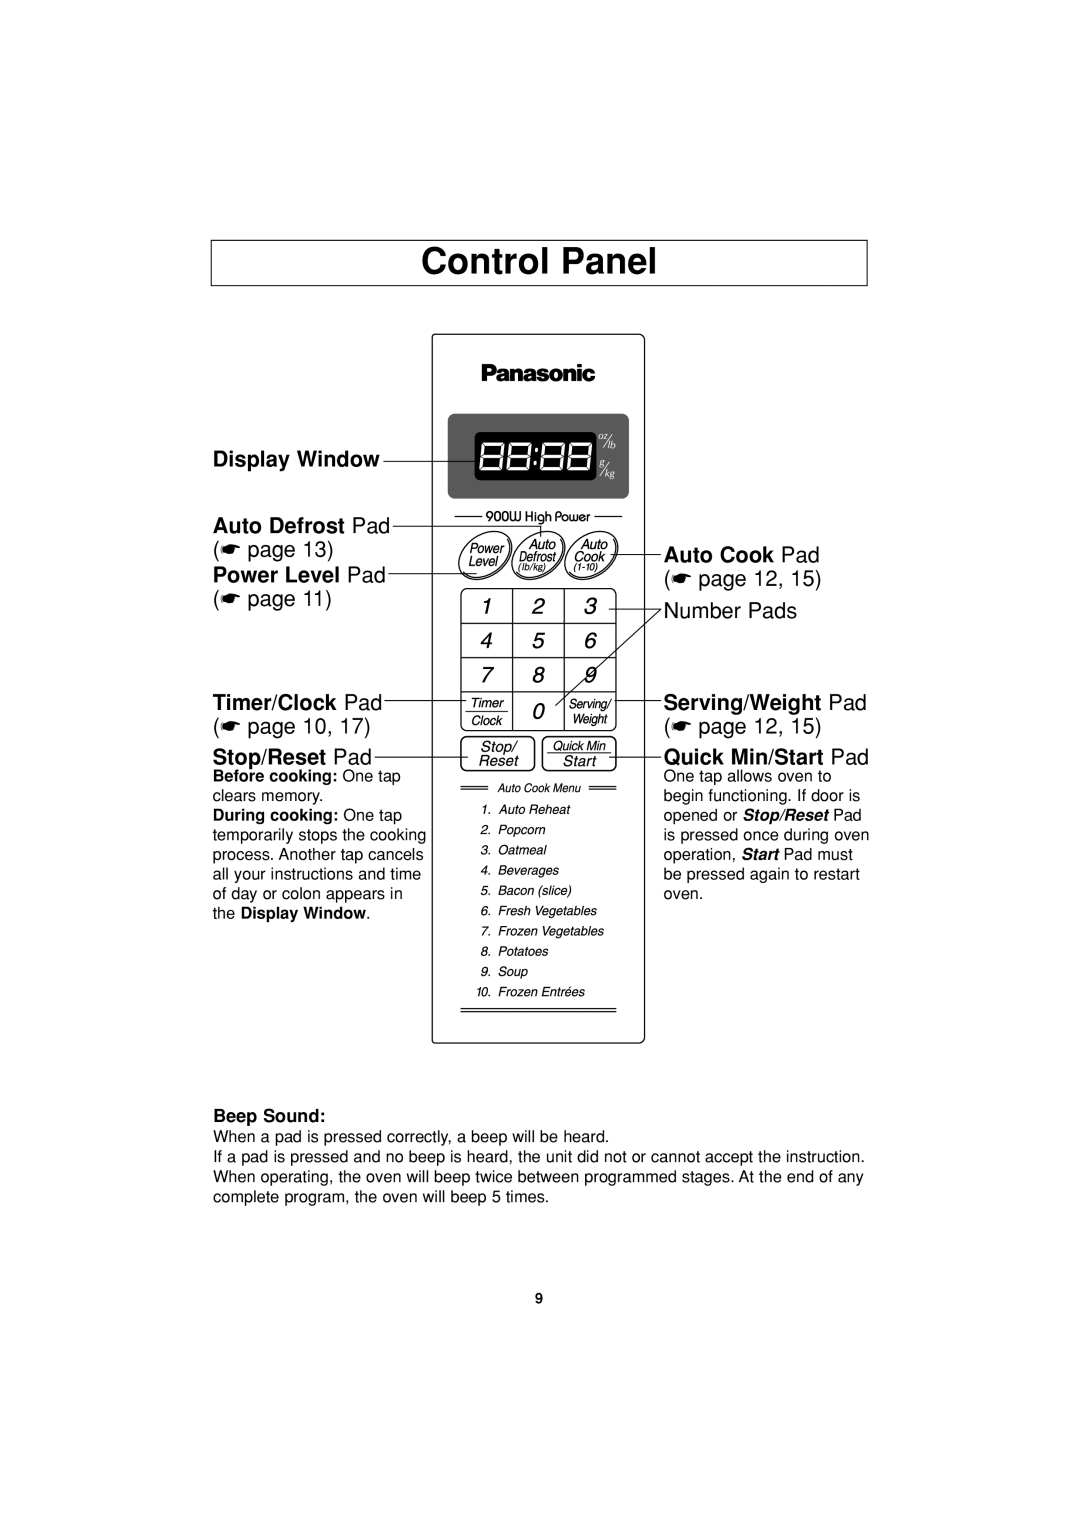 Panasonic NN-S334 Control Panel, Display Window, Auto Defrost Pad, page, Auto Cook Pad, Power Level Pad, Number Pads 